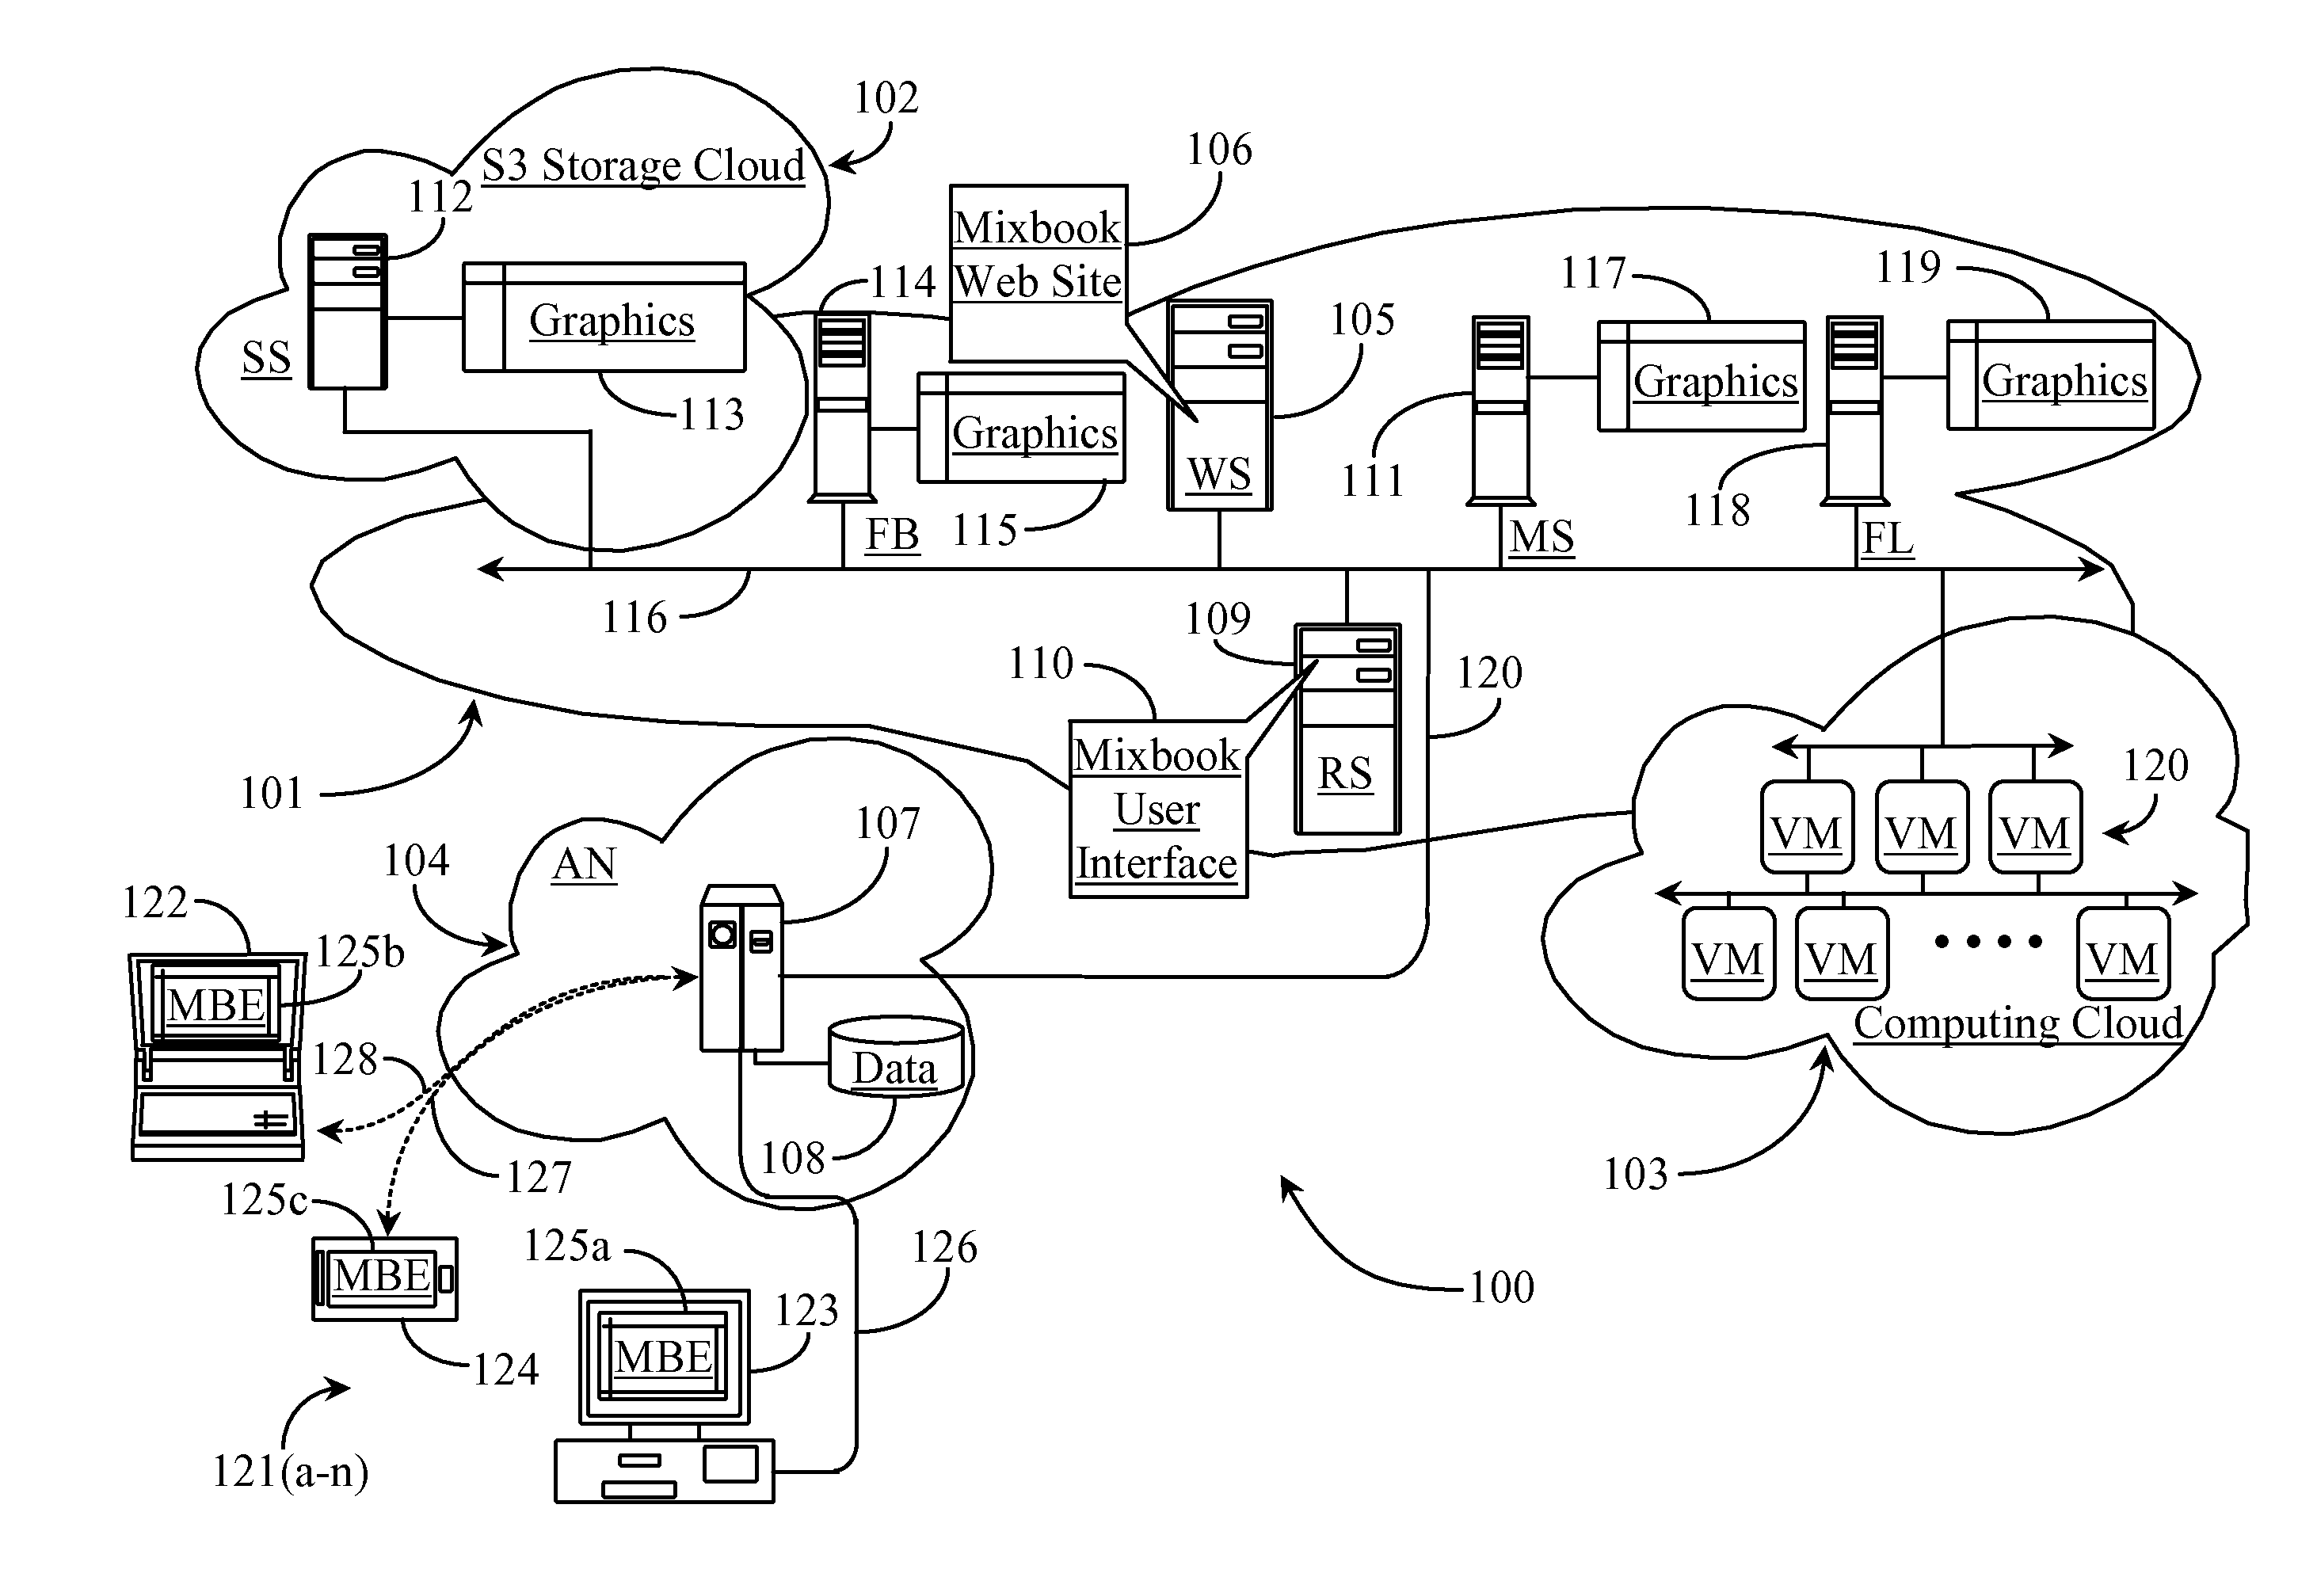 System for Interpolating Data into Data Fields in an Image or Text Based Project